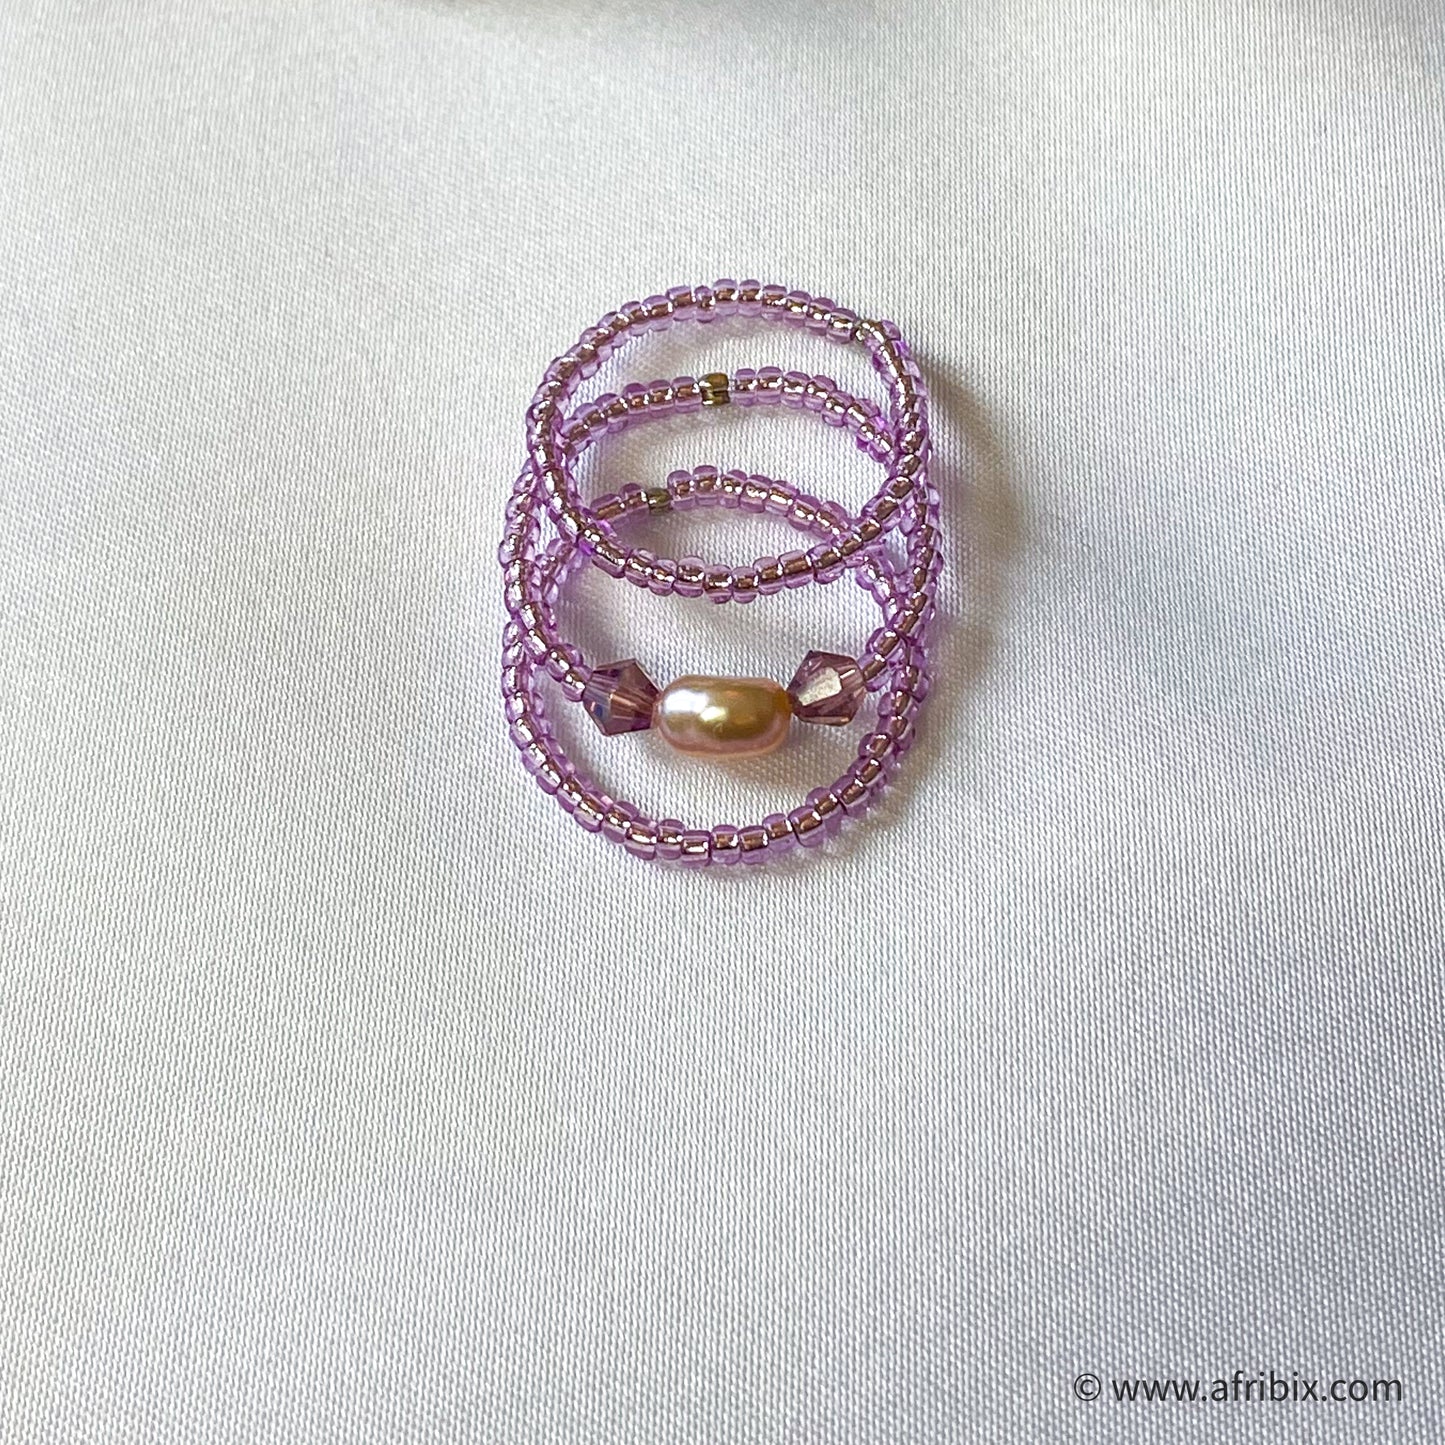 Freshwater Pearl 3-piece glass bead ring